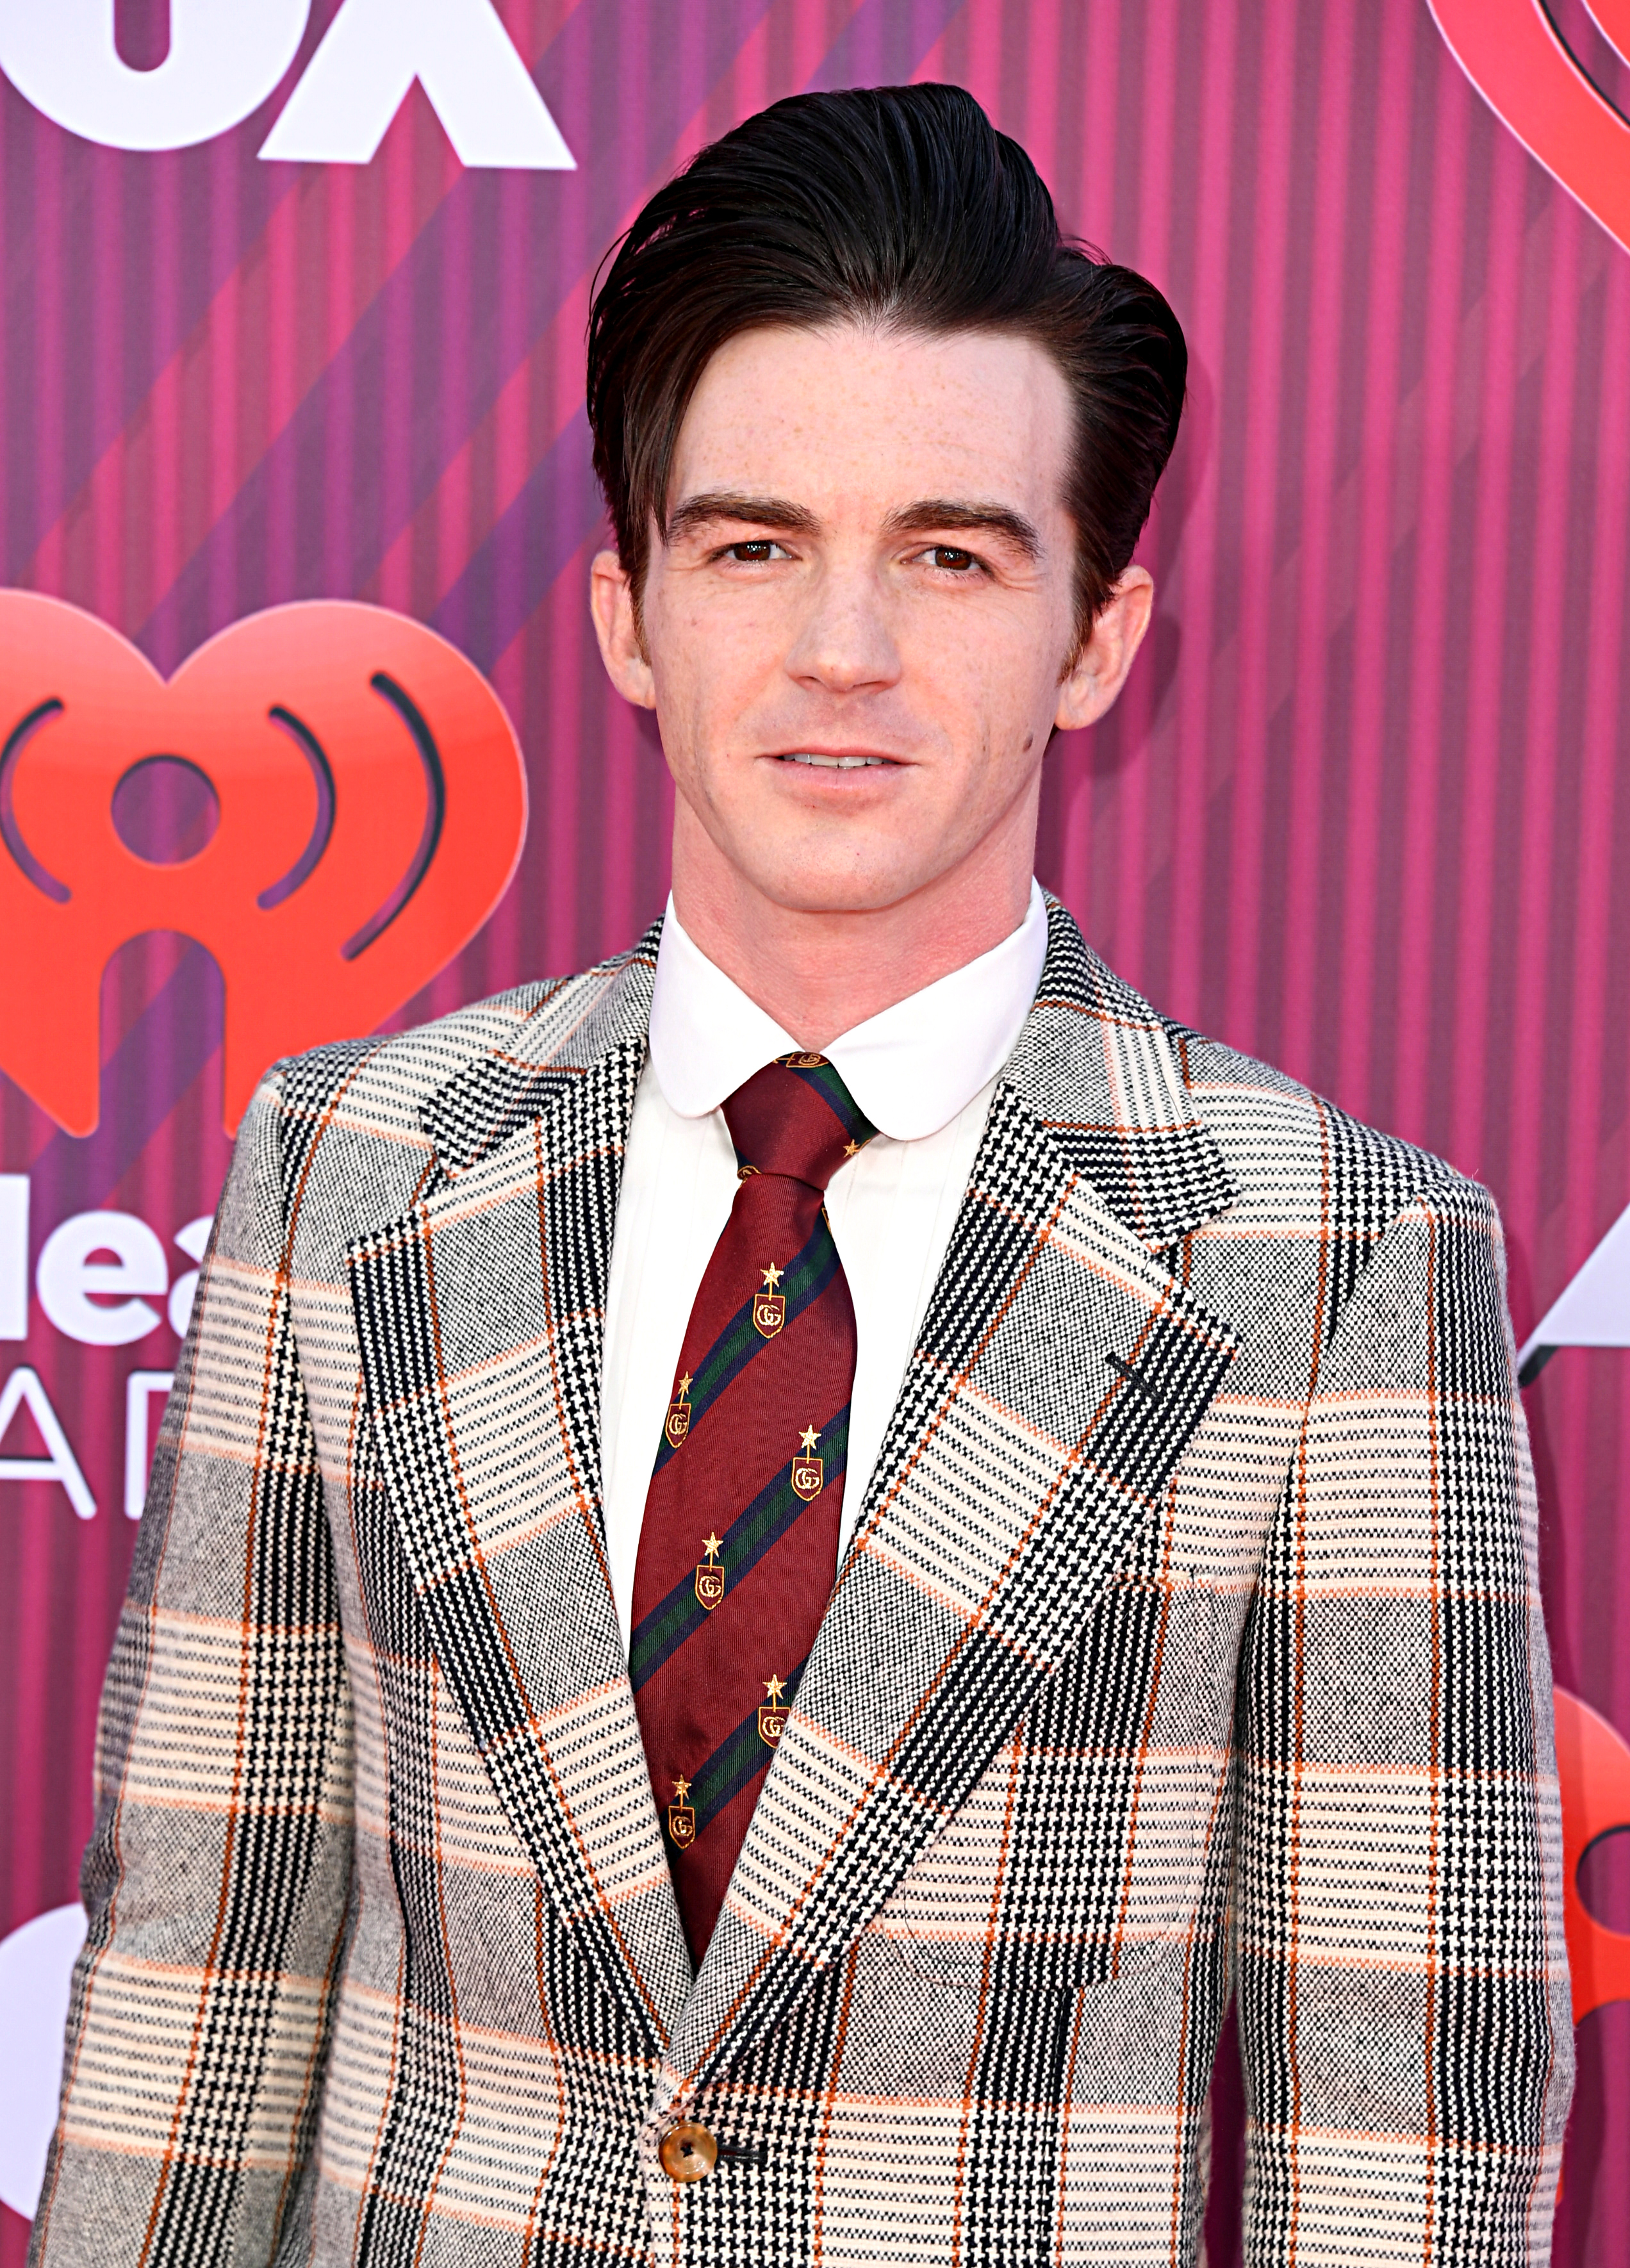 Drake Bell in a plaid suit with a striped tie at an event